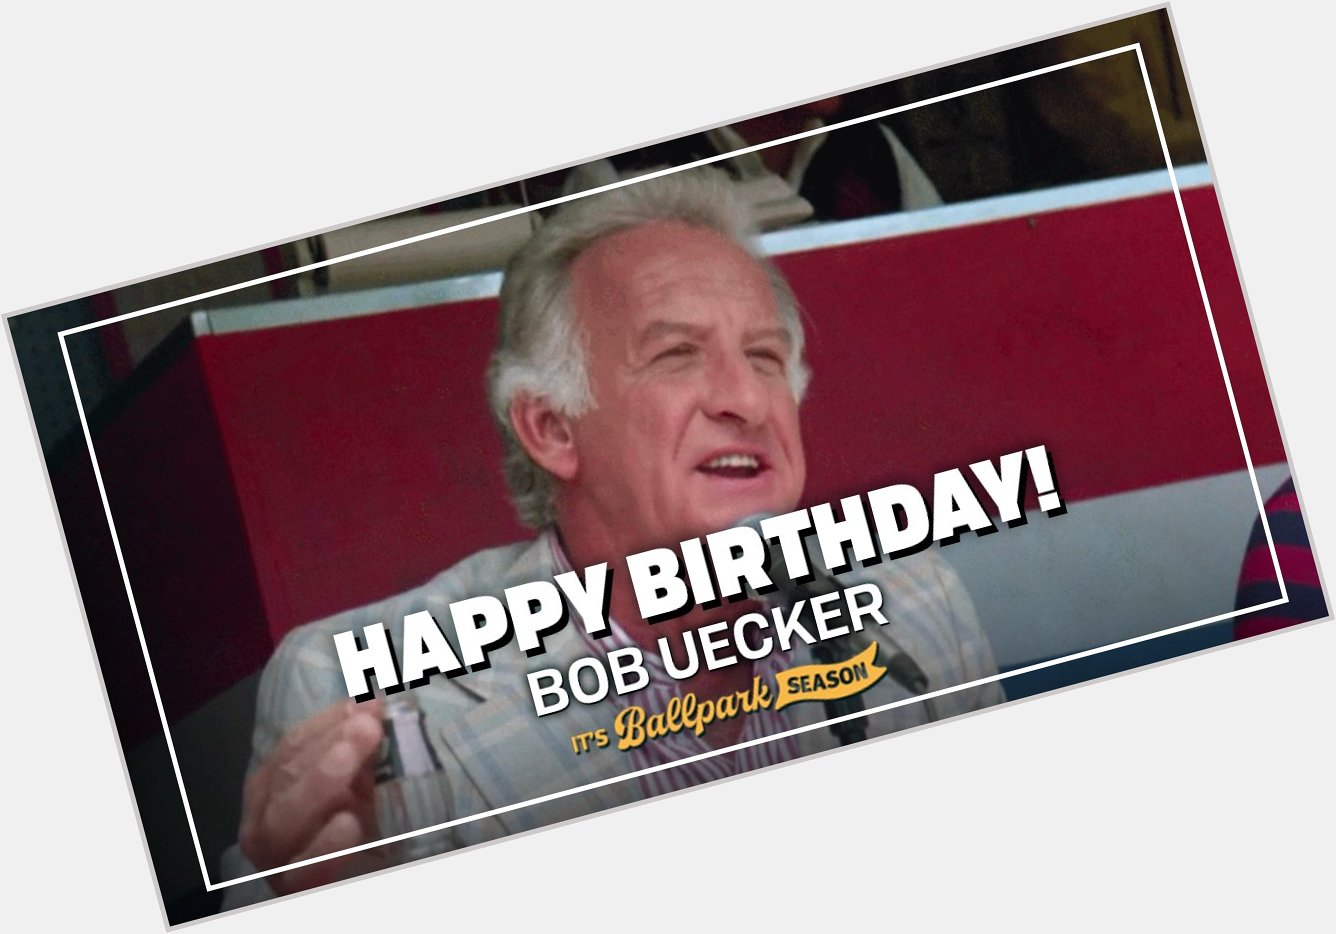 Happy birthday to former catcher and one of baseball\s all-time favorites, Bob Uecker! 